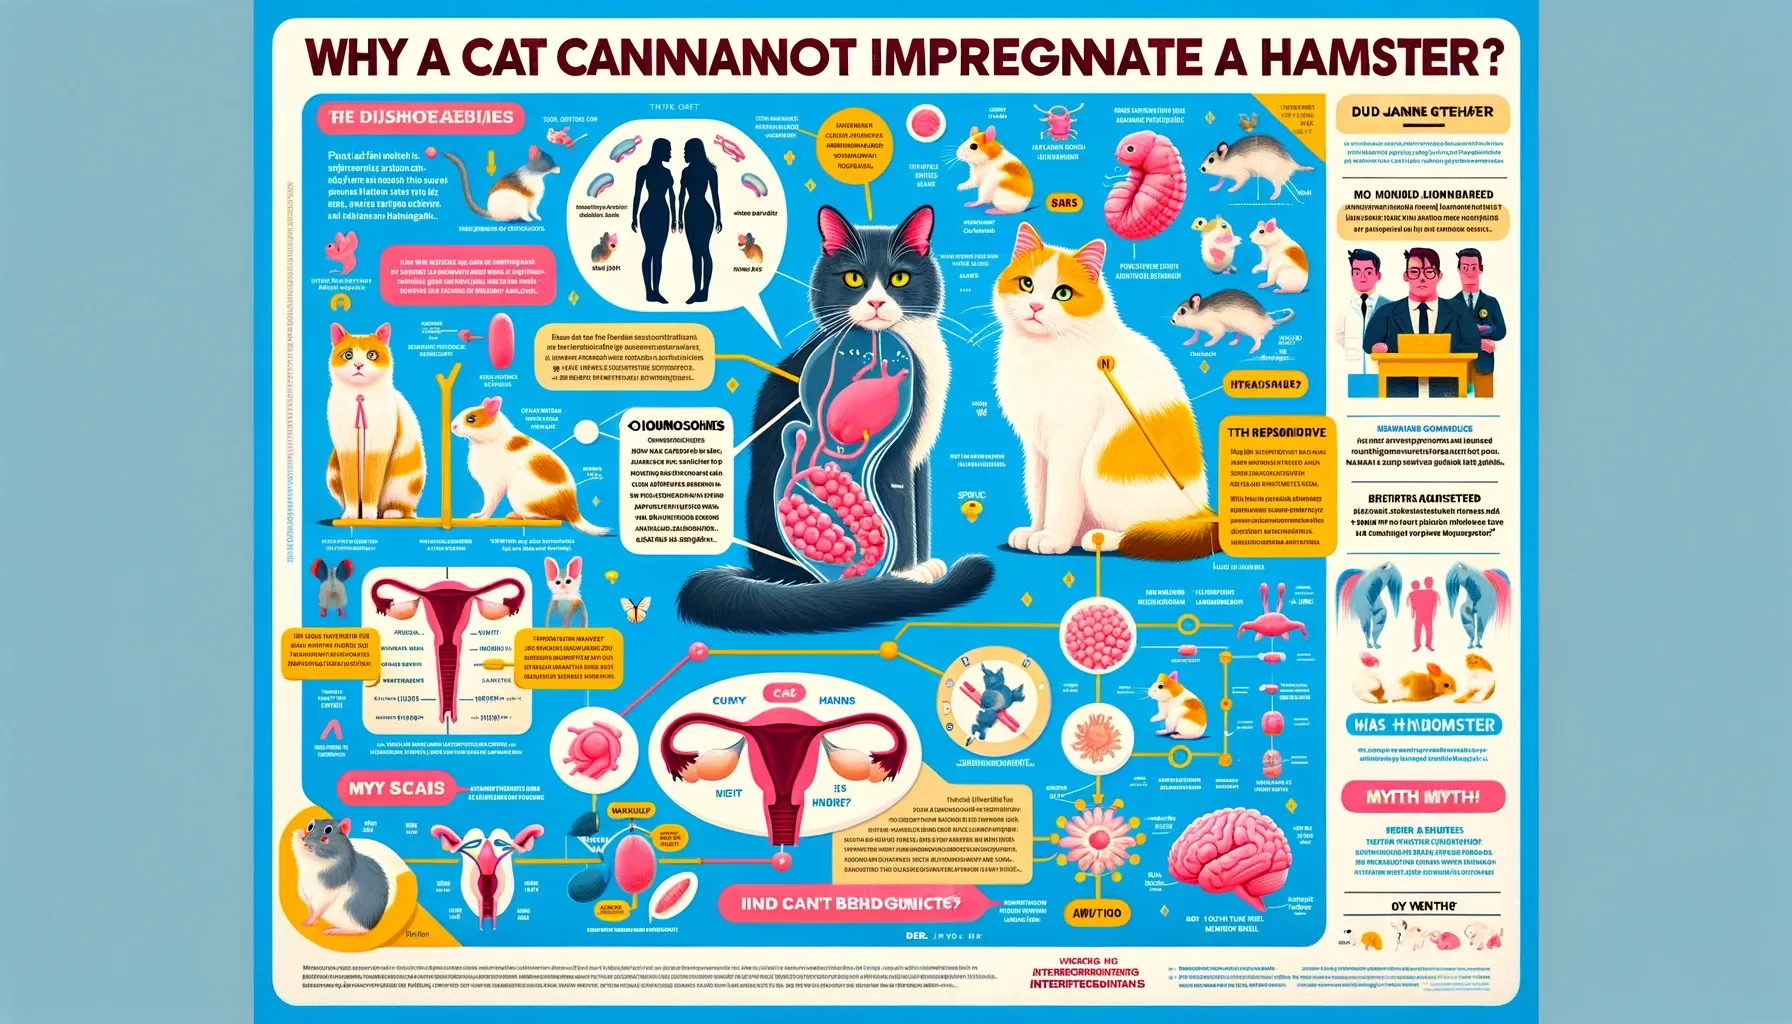 Can a Cat Impregnate a Hamster? Expert Opinions